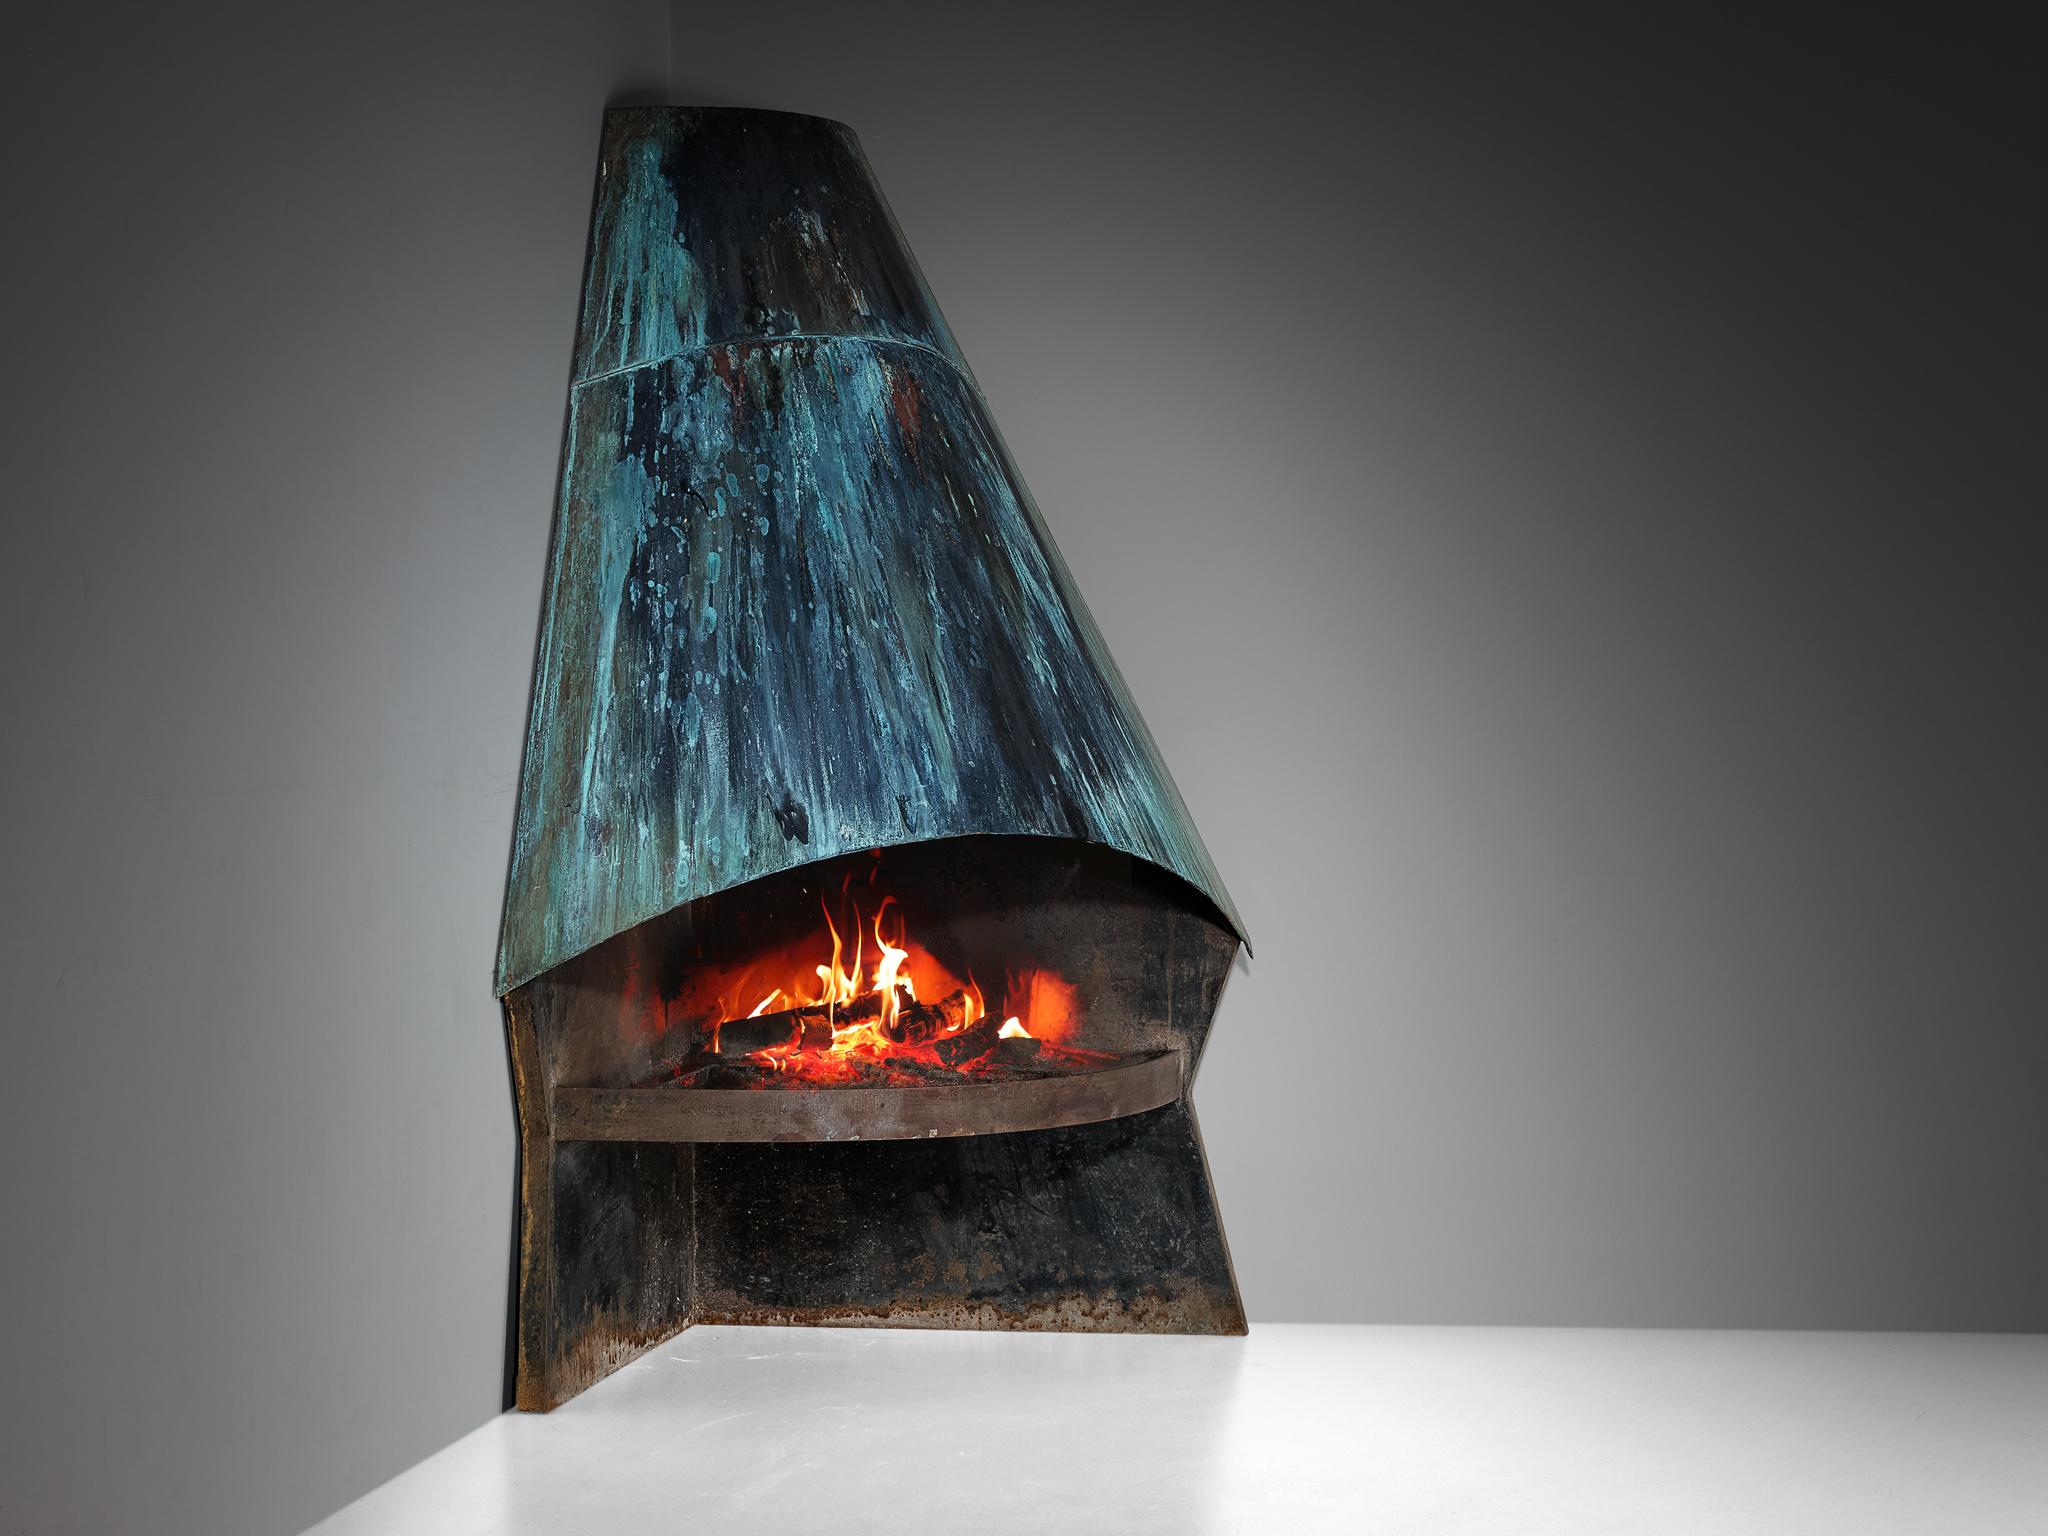 Sizable 203 cm/80 inch fire place, sheet steel, Europe, 1970s

A true eye catcher and beautiful piece of 20th century design, this large fire place executed in sheet steel instantly lifts up the entire atmosphere of a space. With its blue patina and